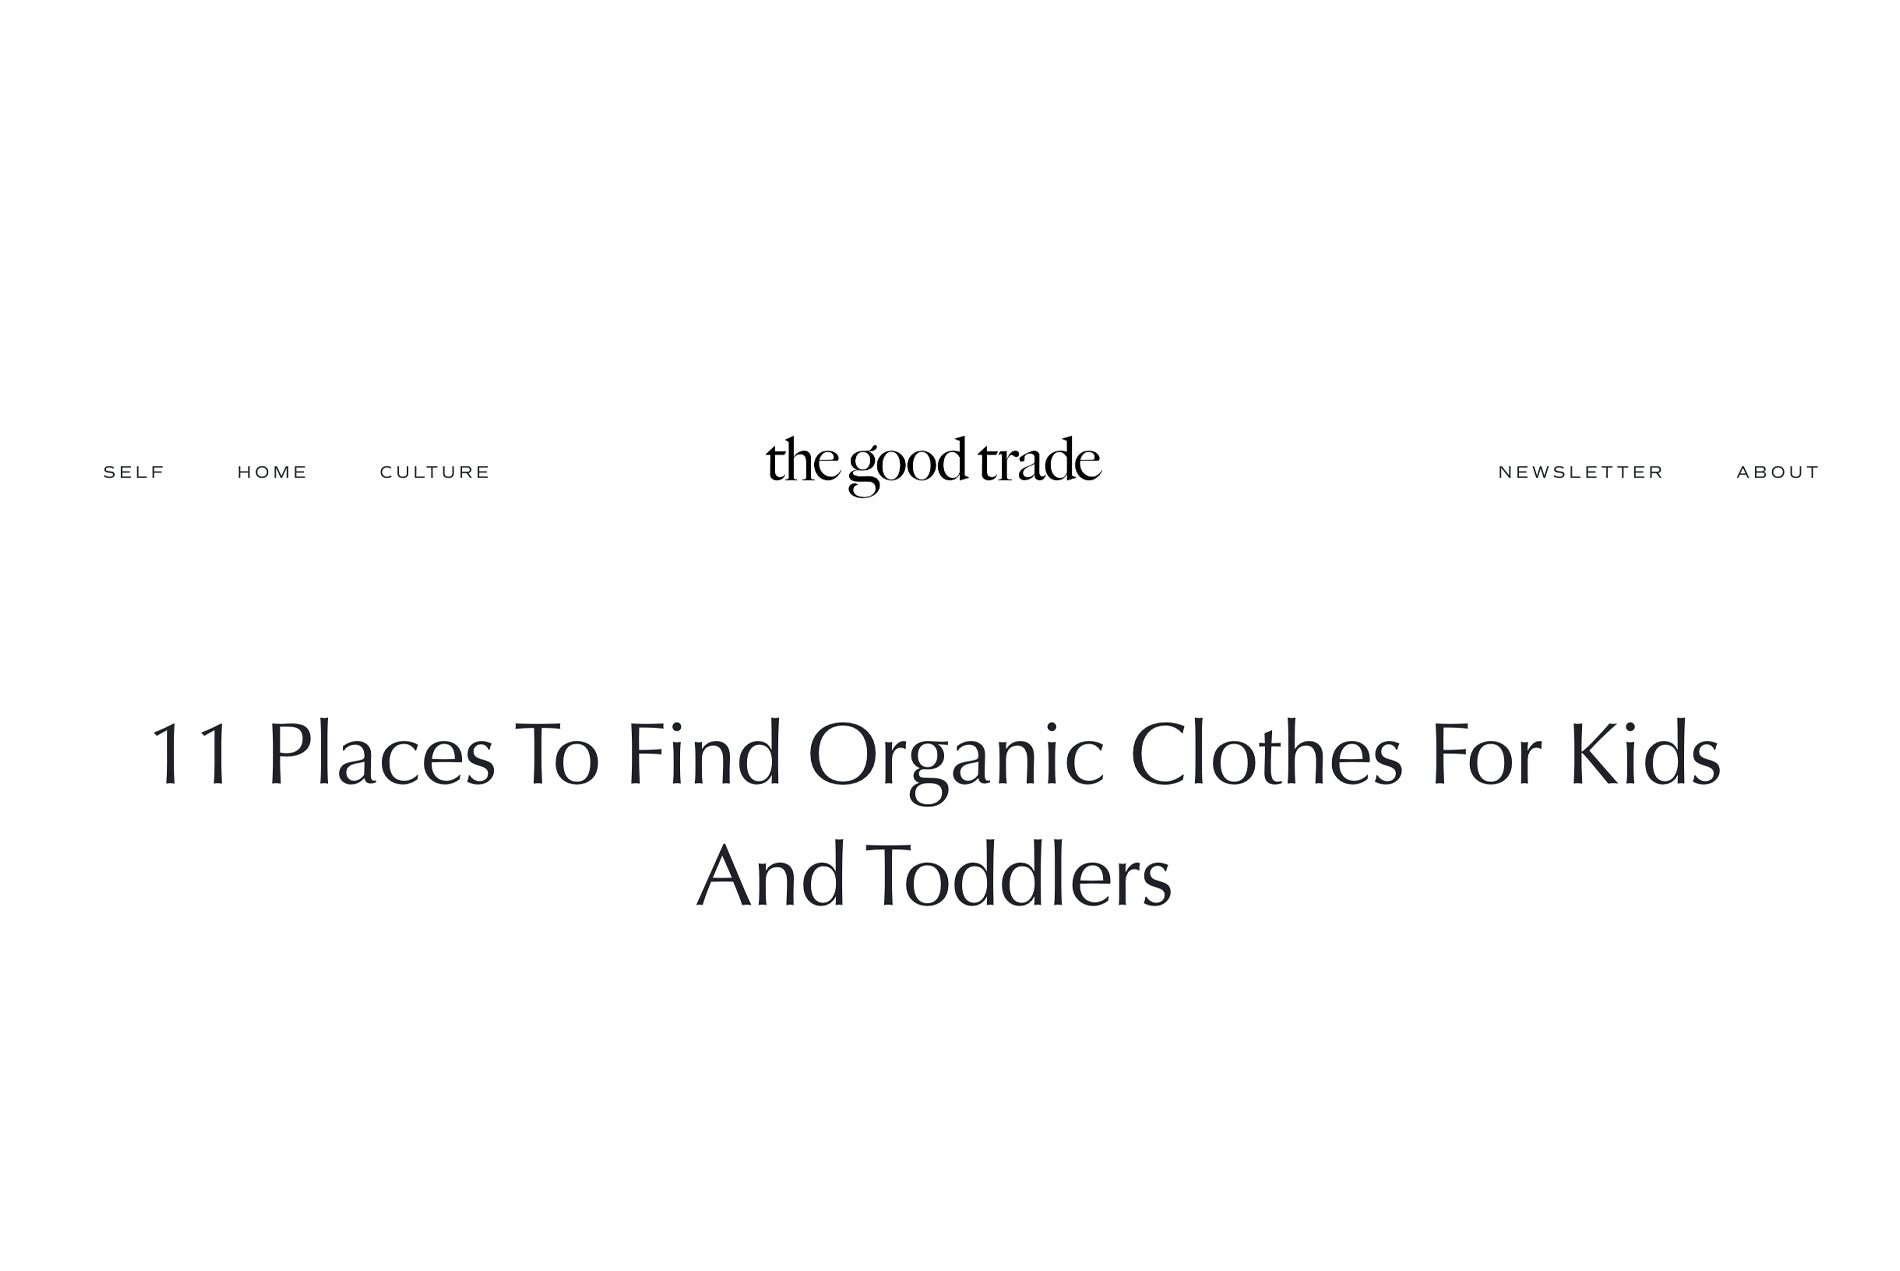 Looking for the Best in Organic Clothing for Toddlers and Kids?